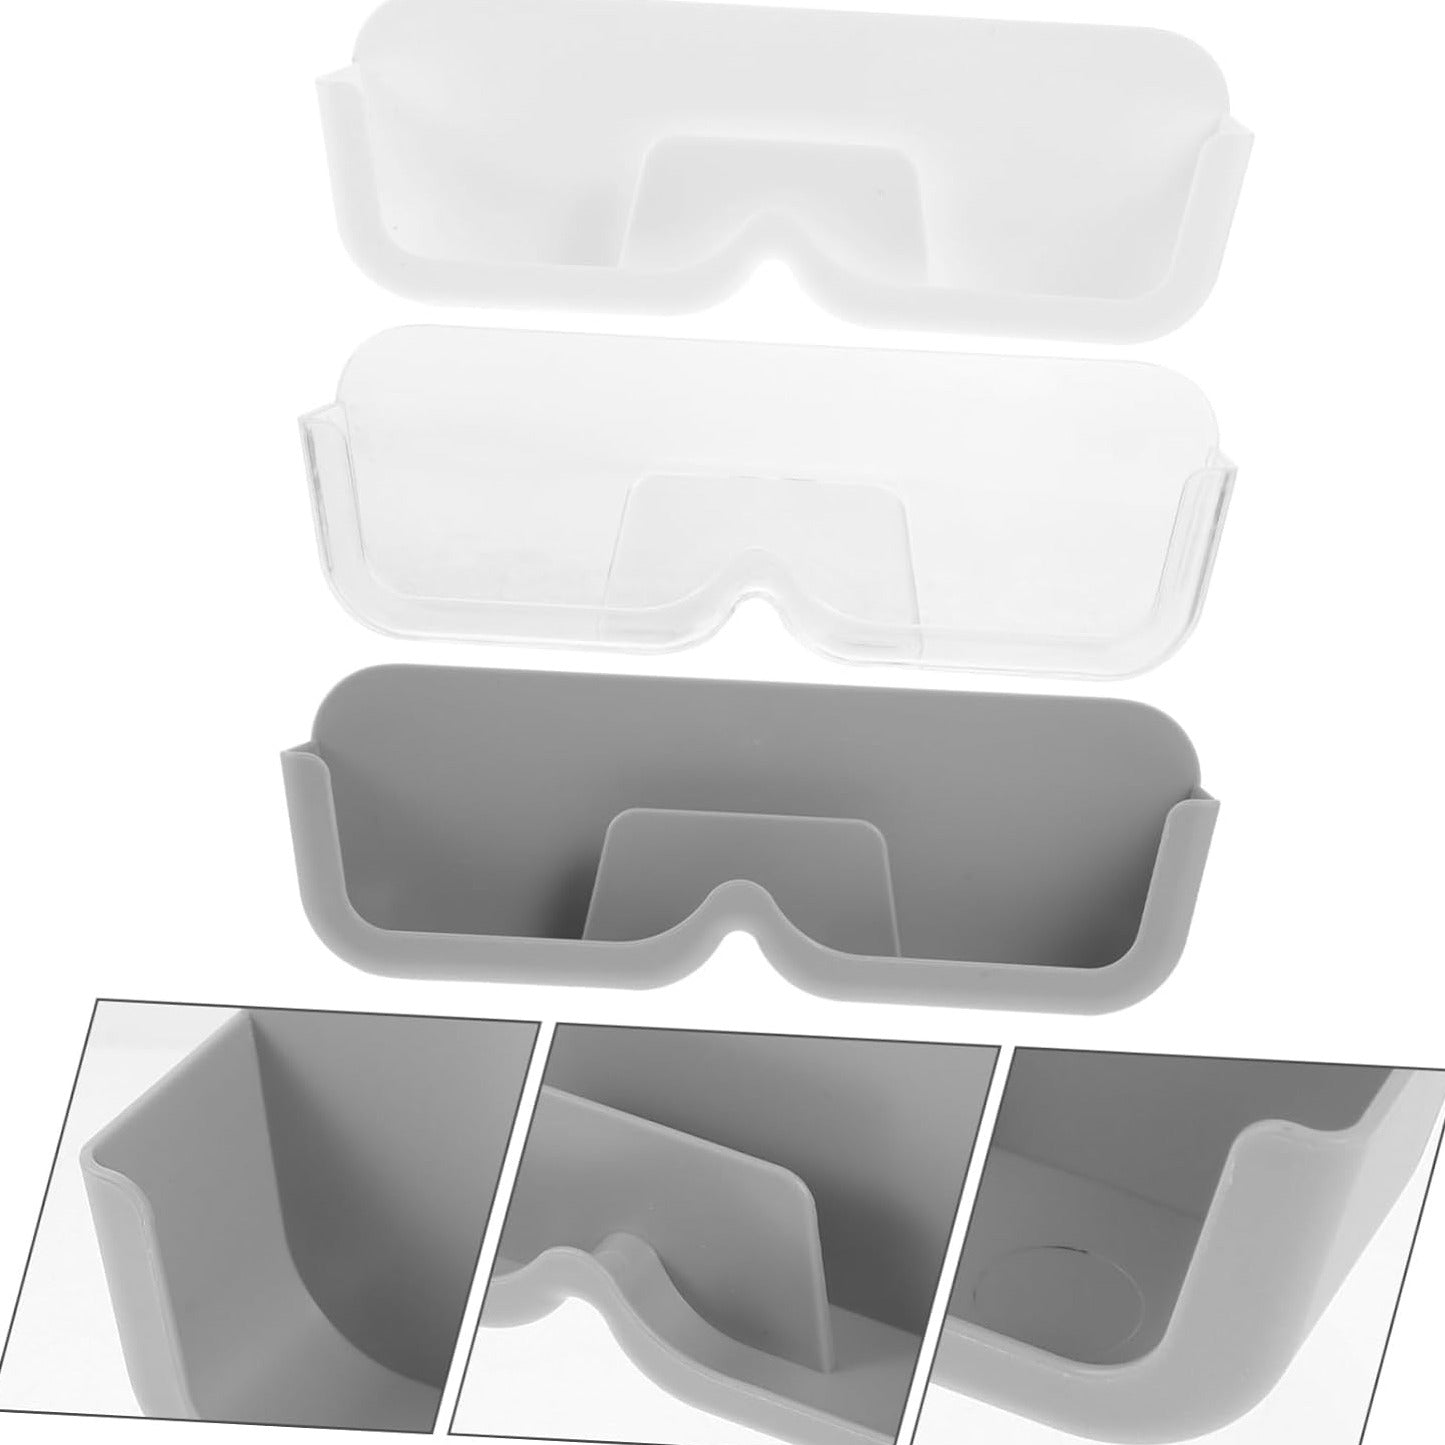 Parts of Wall Mounted Eye Glass Holder.